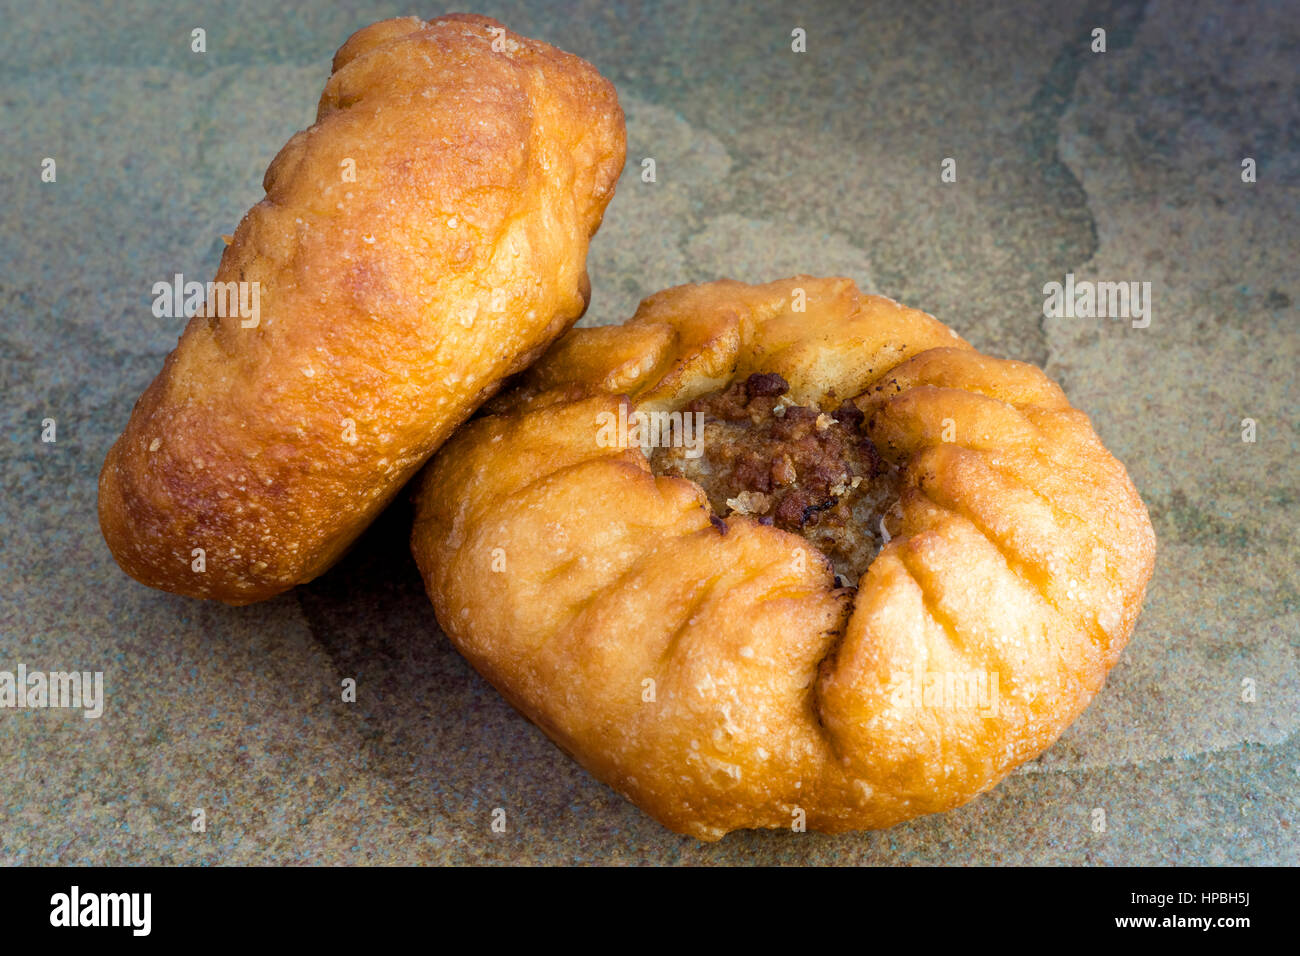 Tat, fried pies with meat Stock Photo